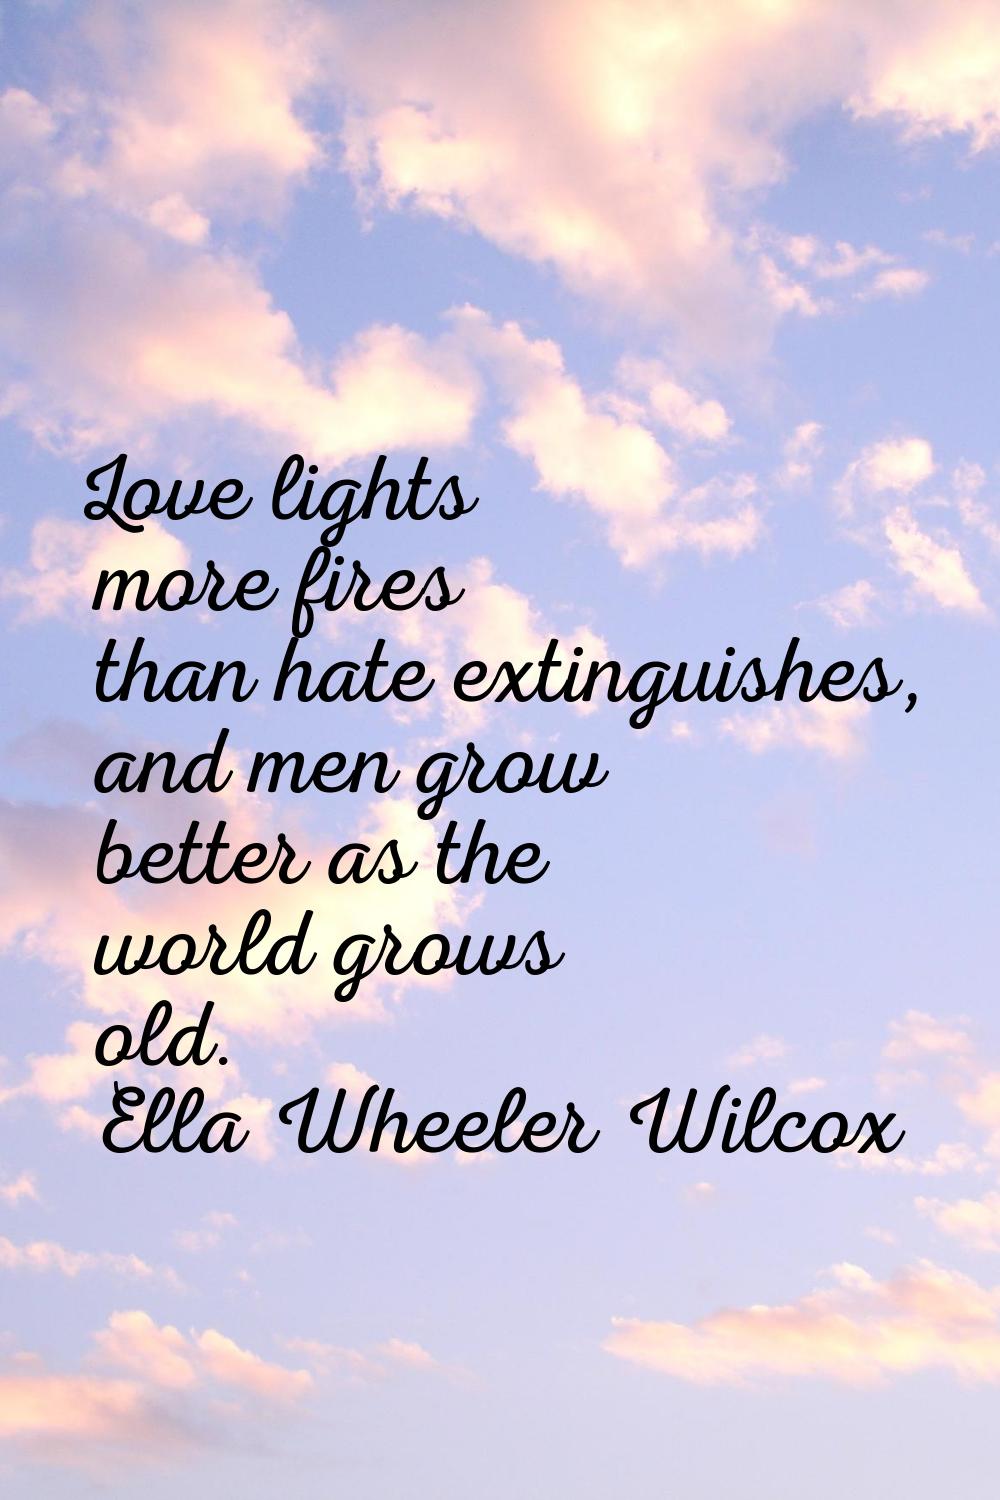 Love lights more fires than hate extinguishes, and men grow better as the world grows old.